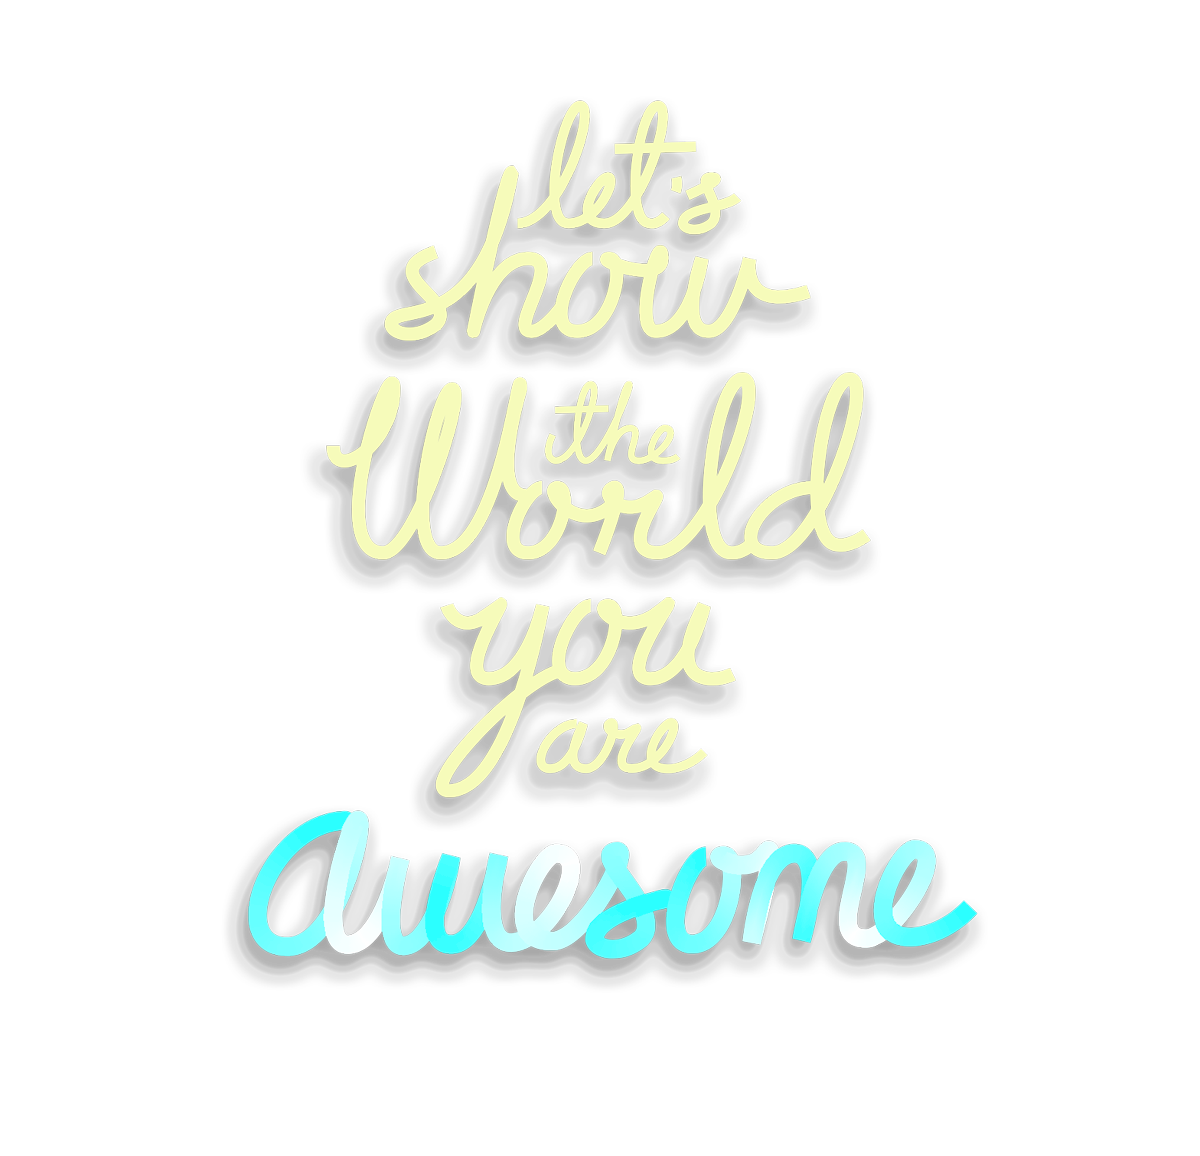 Let's tell the world you are awesome